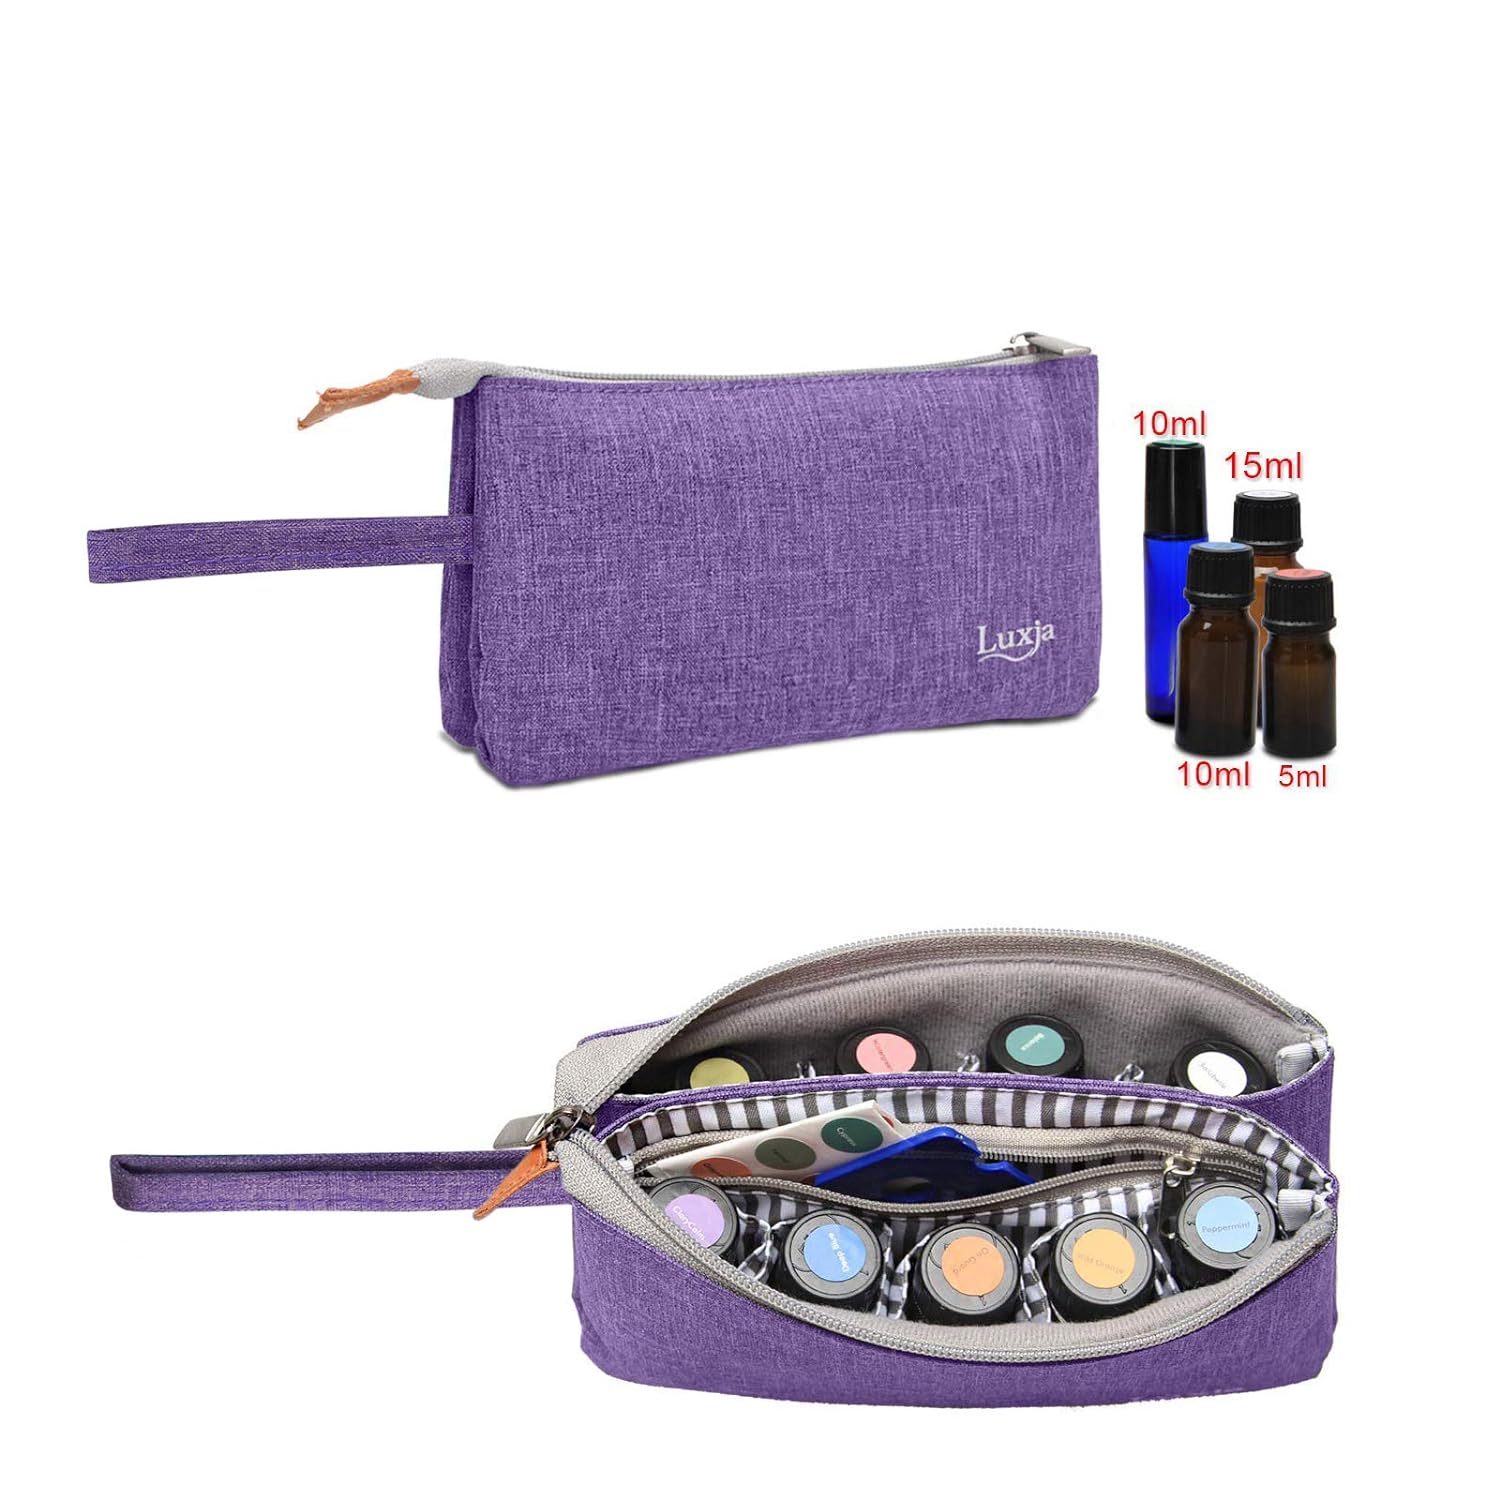 LUXJA Essential Oil Carrying Bag - Holds 9 Bottles (5ml-15ml, Also Fits for Roller Bottles), Portable Organizer for Essential Oil and Small Accessories, Purple